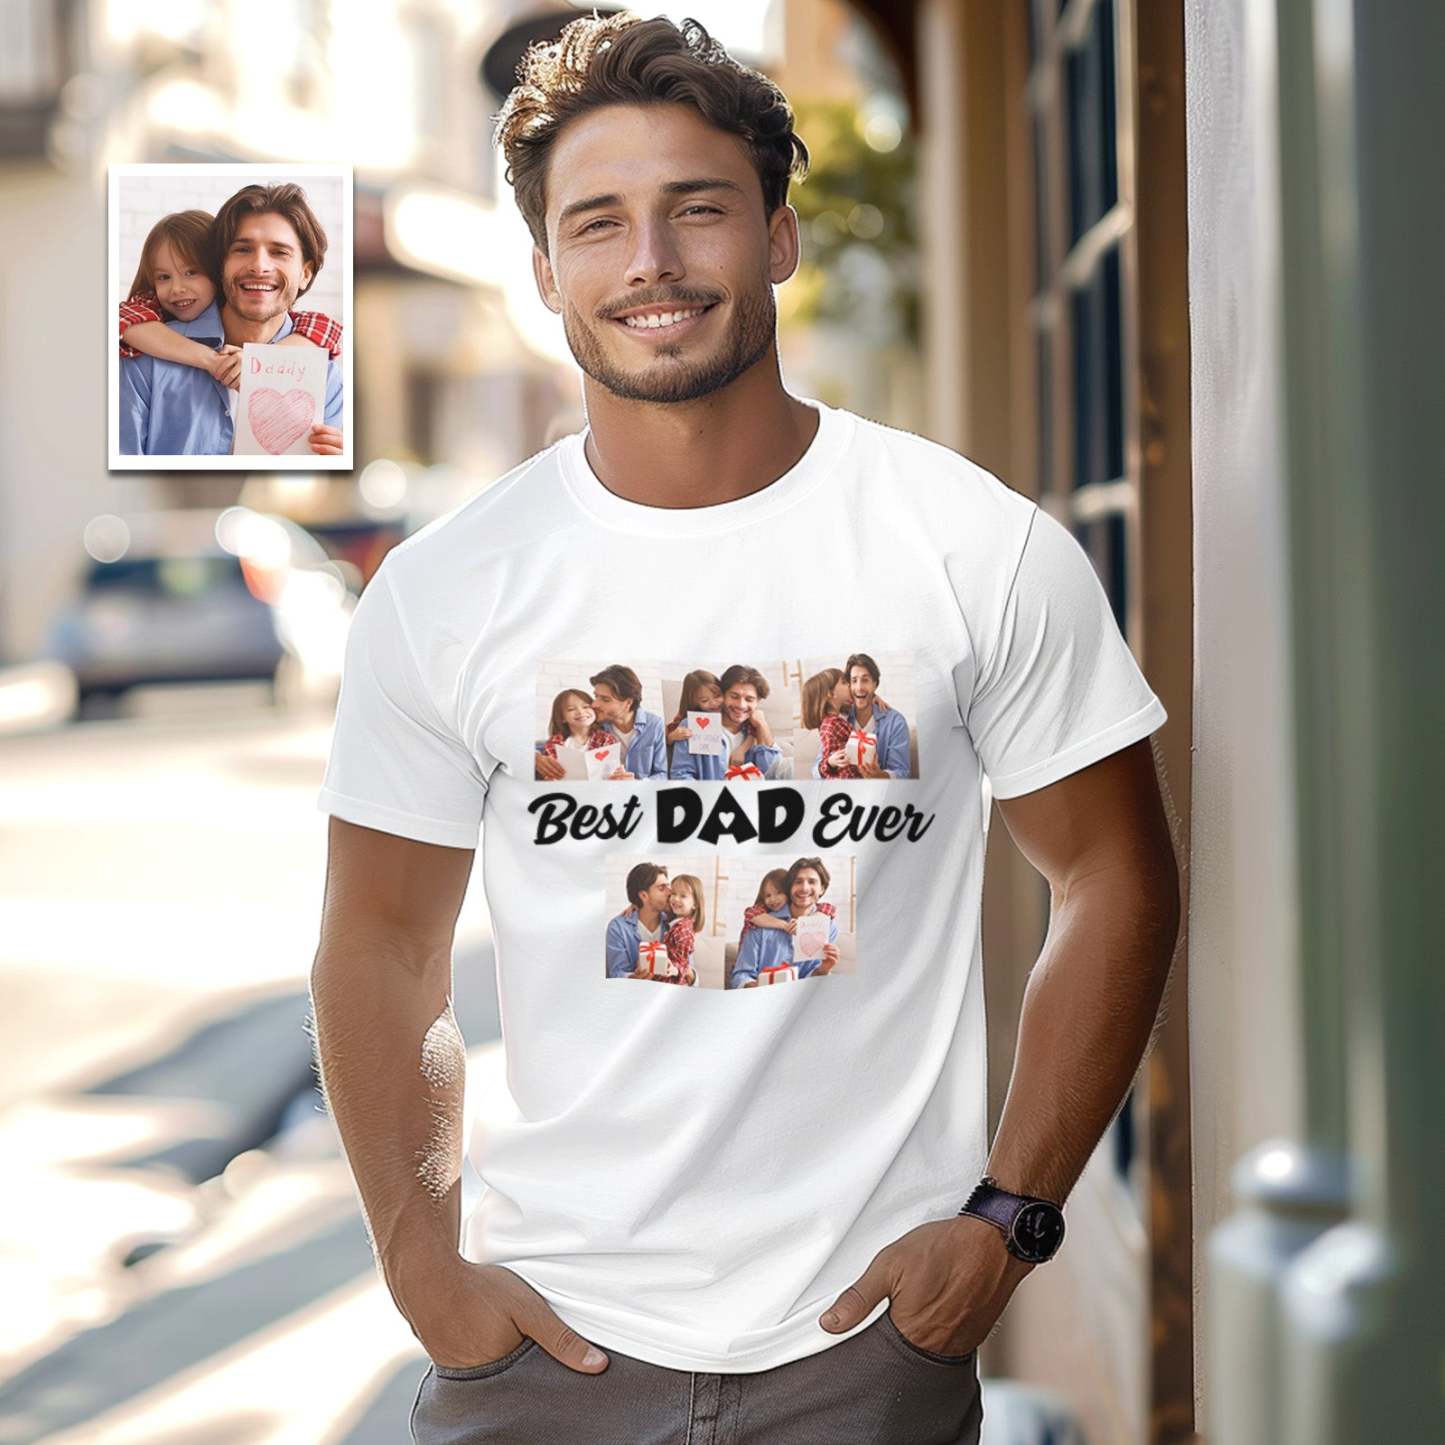 Custom 5 Photos T-Shirt With Best Dad Ever Personalized Photos T-Shirt Father's Day Gift - GetPhotoSocksUk